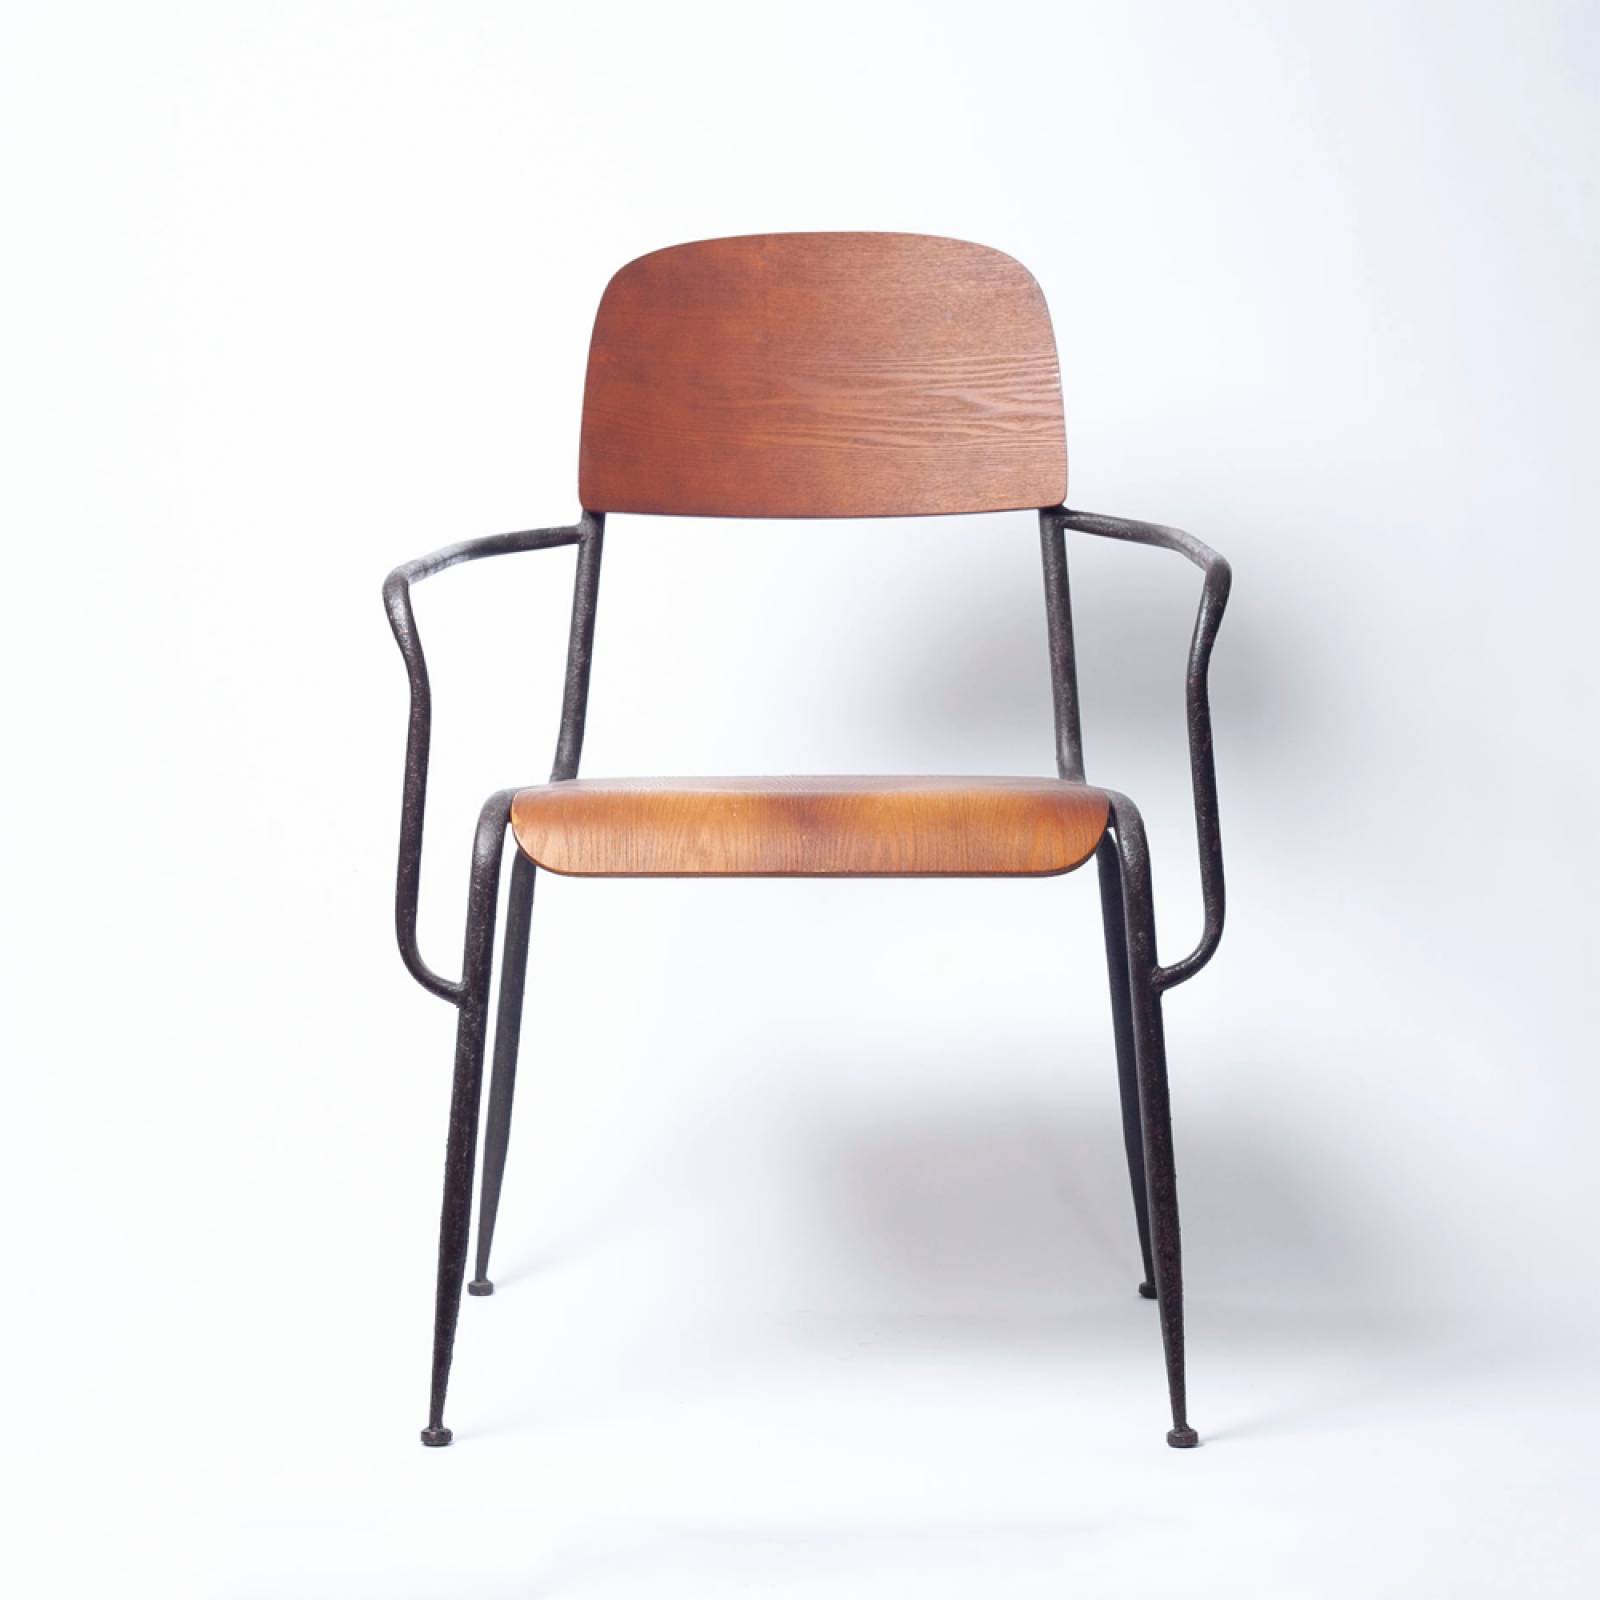 Industrial Faculty Chair With Metal Frame & Wooden Seat thumbnails